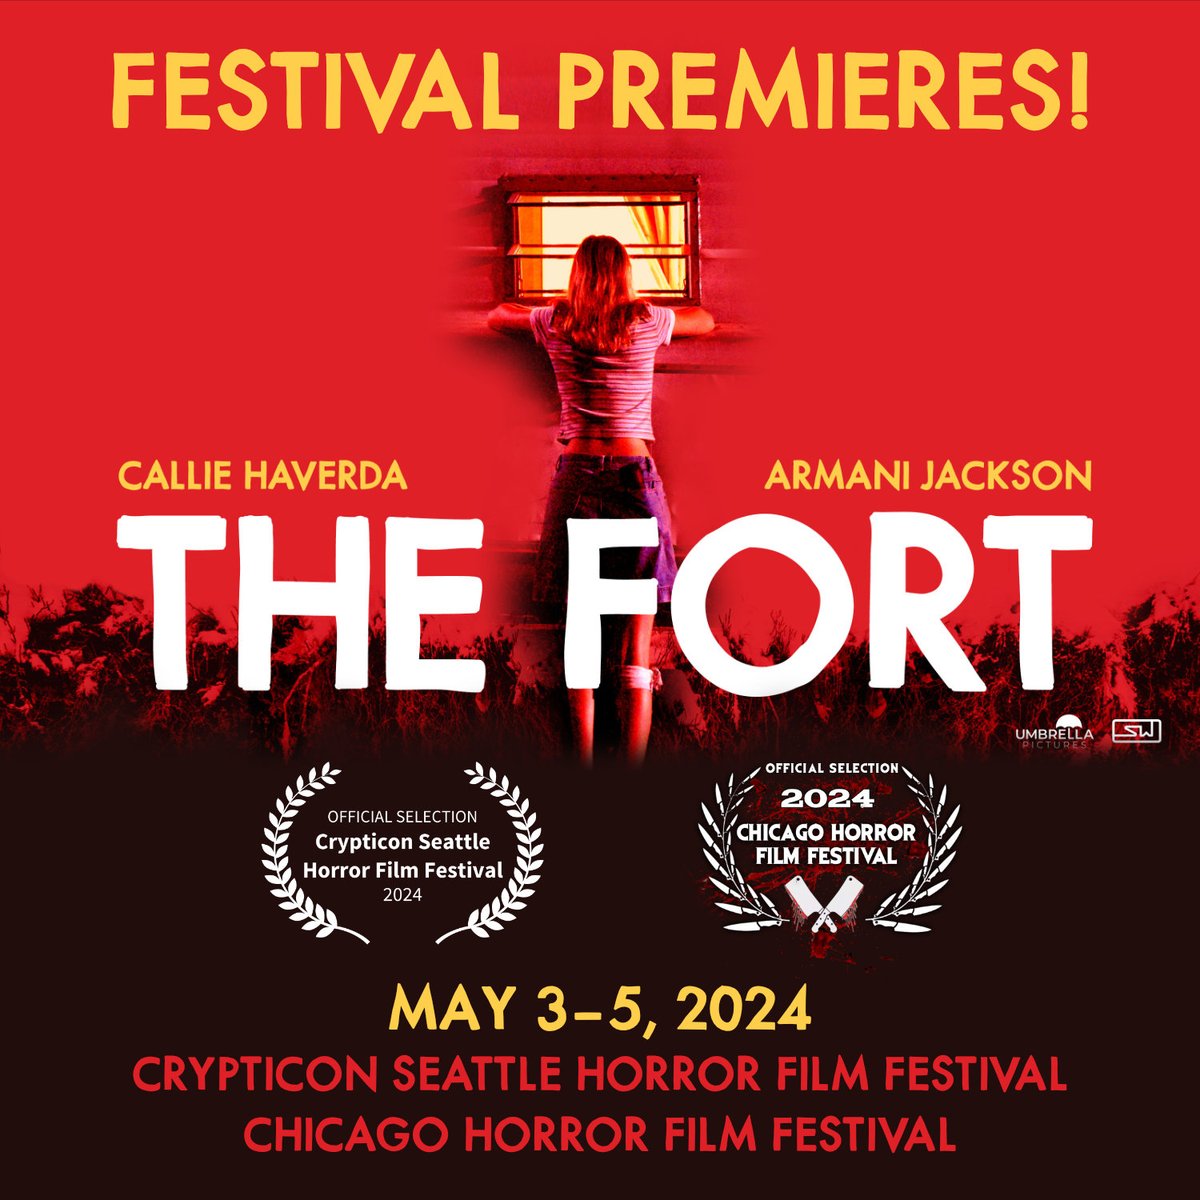 'The Fort' short film premieres this weekend on Saturday, May 4th at two festivals simultaneously!

The Chicago festival has three screens available. One that sits 25, one 55, and one with 126 seat capacity... they put 'The Fort' on the largest screen with 126 seats! How cool!